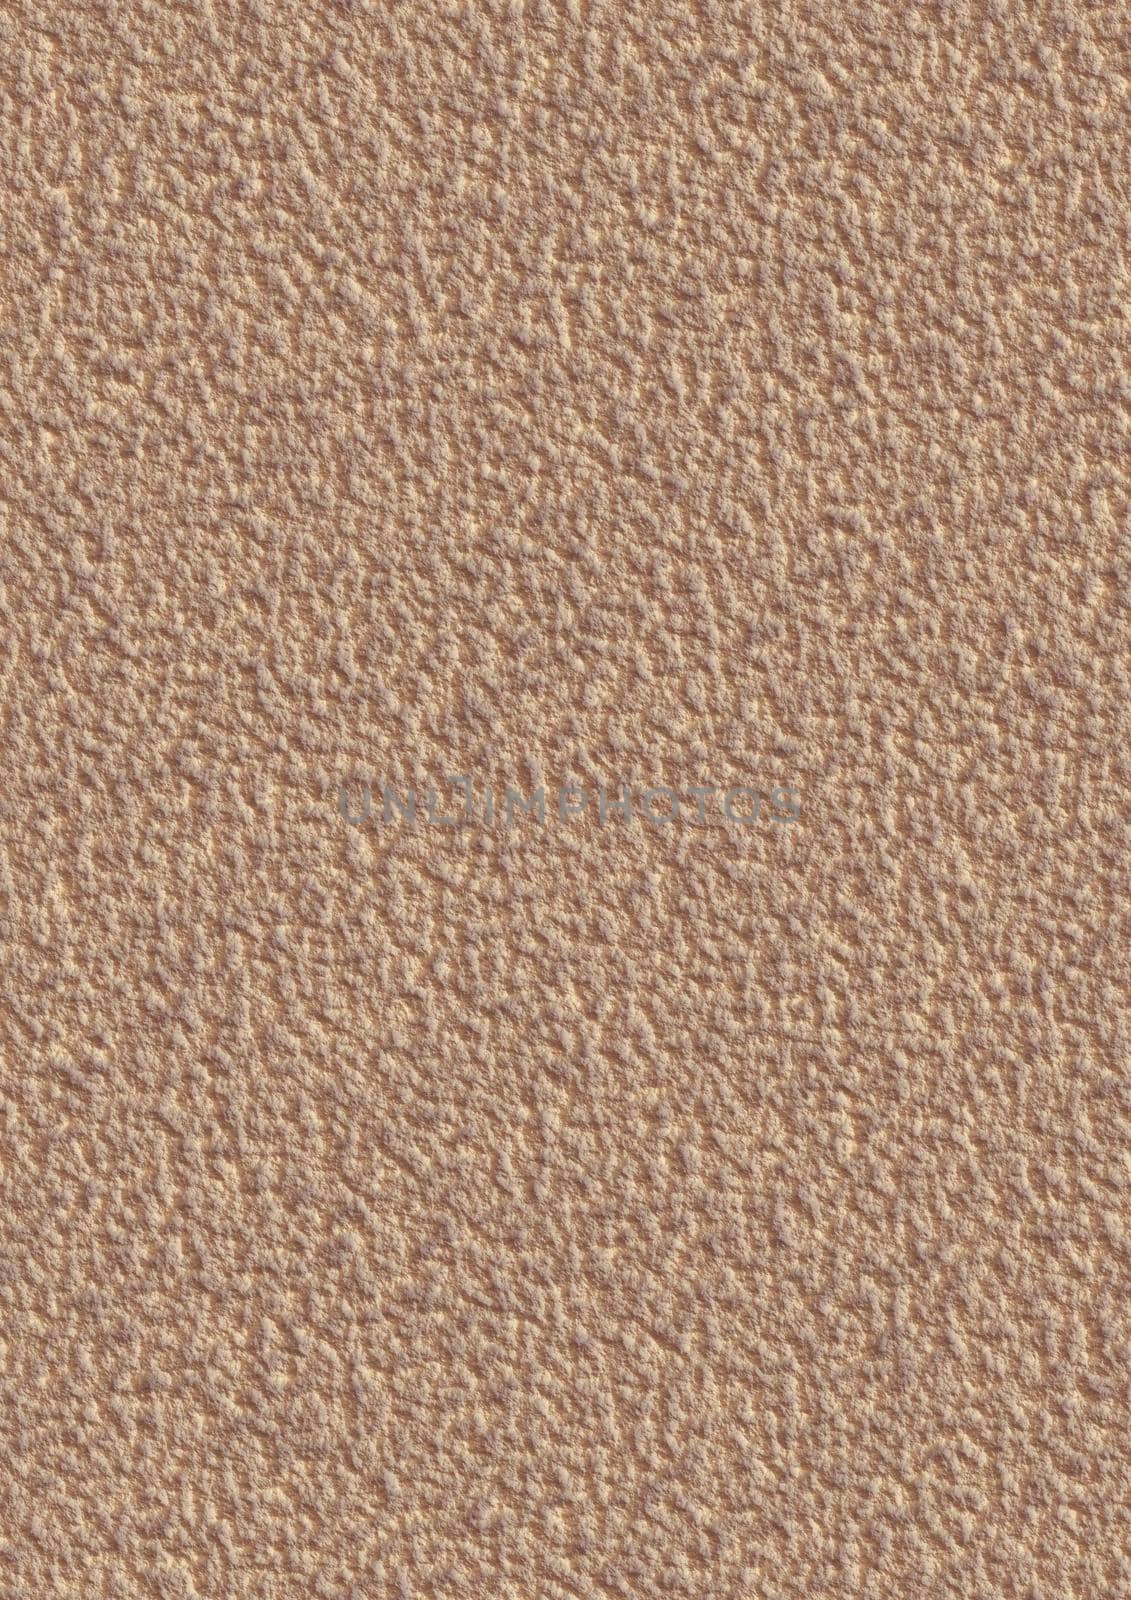 Sandy surface close up as a background